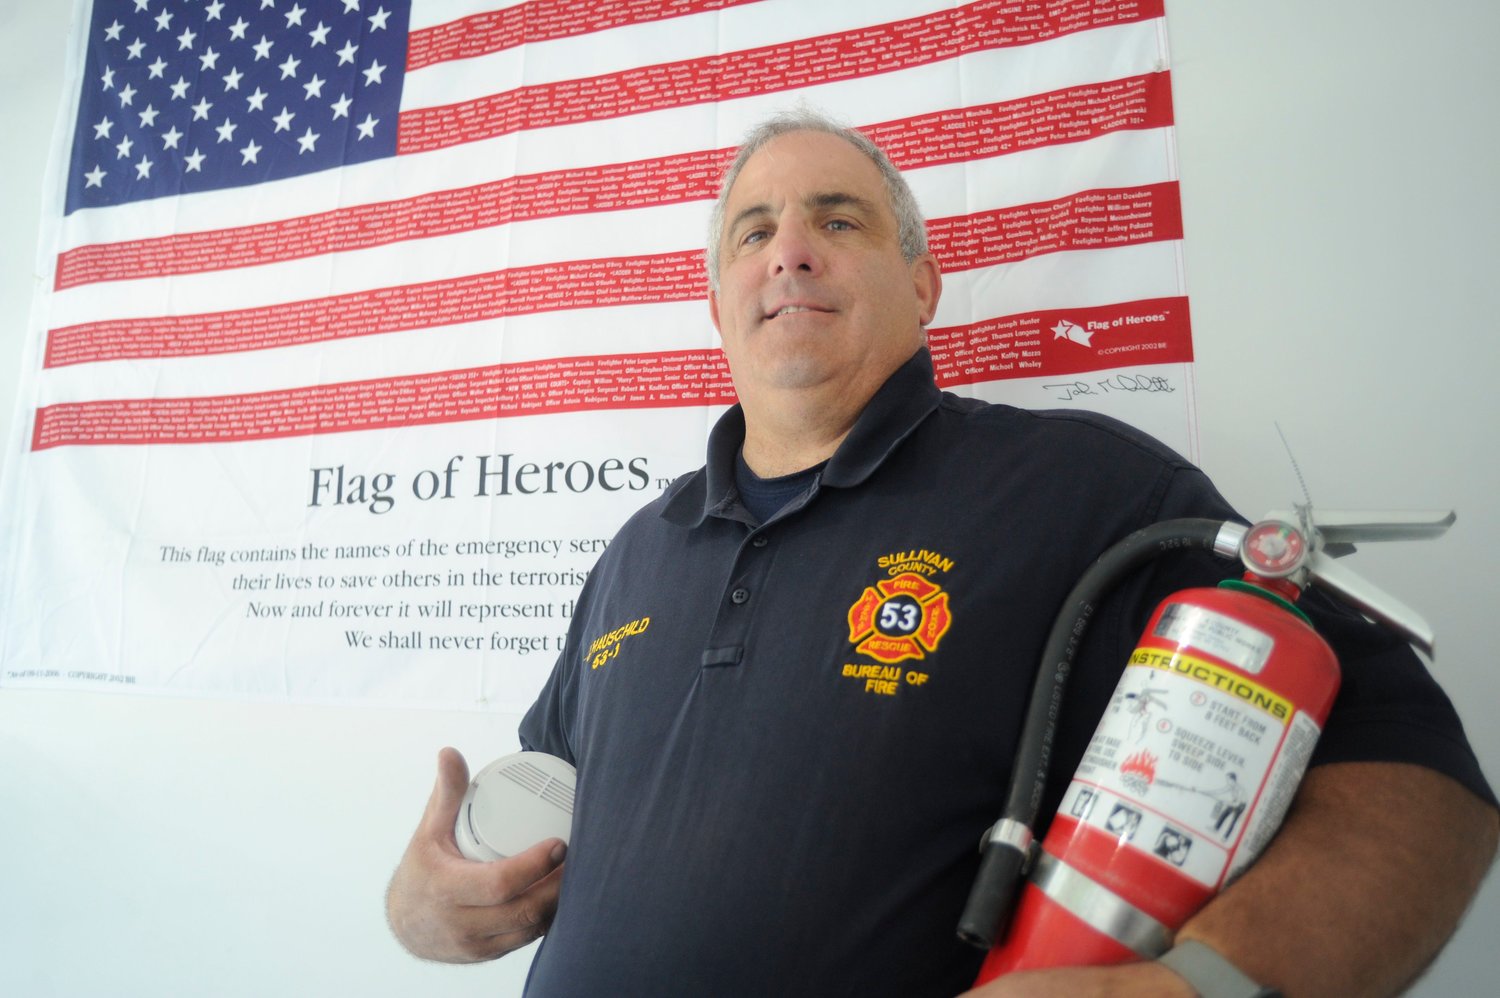 John Hauschild, Sullivan County fire coordinator and Emergency Services Training Center coordinator, proudly stands in front of the center’s “Flag of Heroes,” which lists the names of the emergency services personnel who gave their lives to save others on September 11, 2001...He is pictured holding a smoke detector and a fire extinguisher, two key elements of fire prevention...“We will always remember and never forget them... the sacrifices that were made by all,” said Hauschild of the roster of heroes.